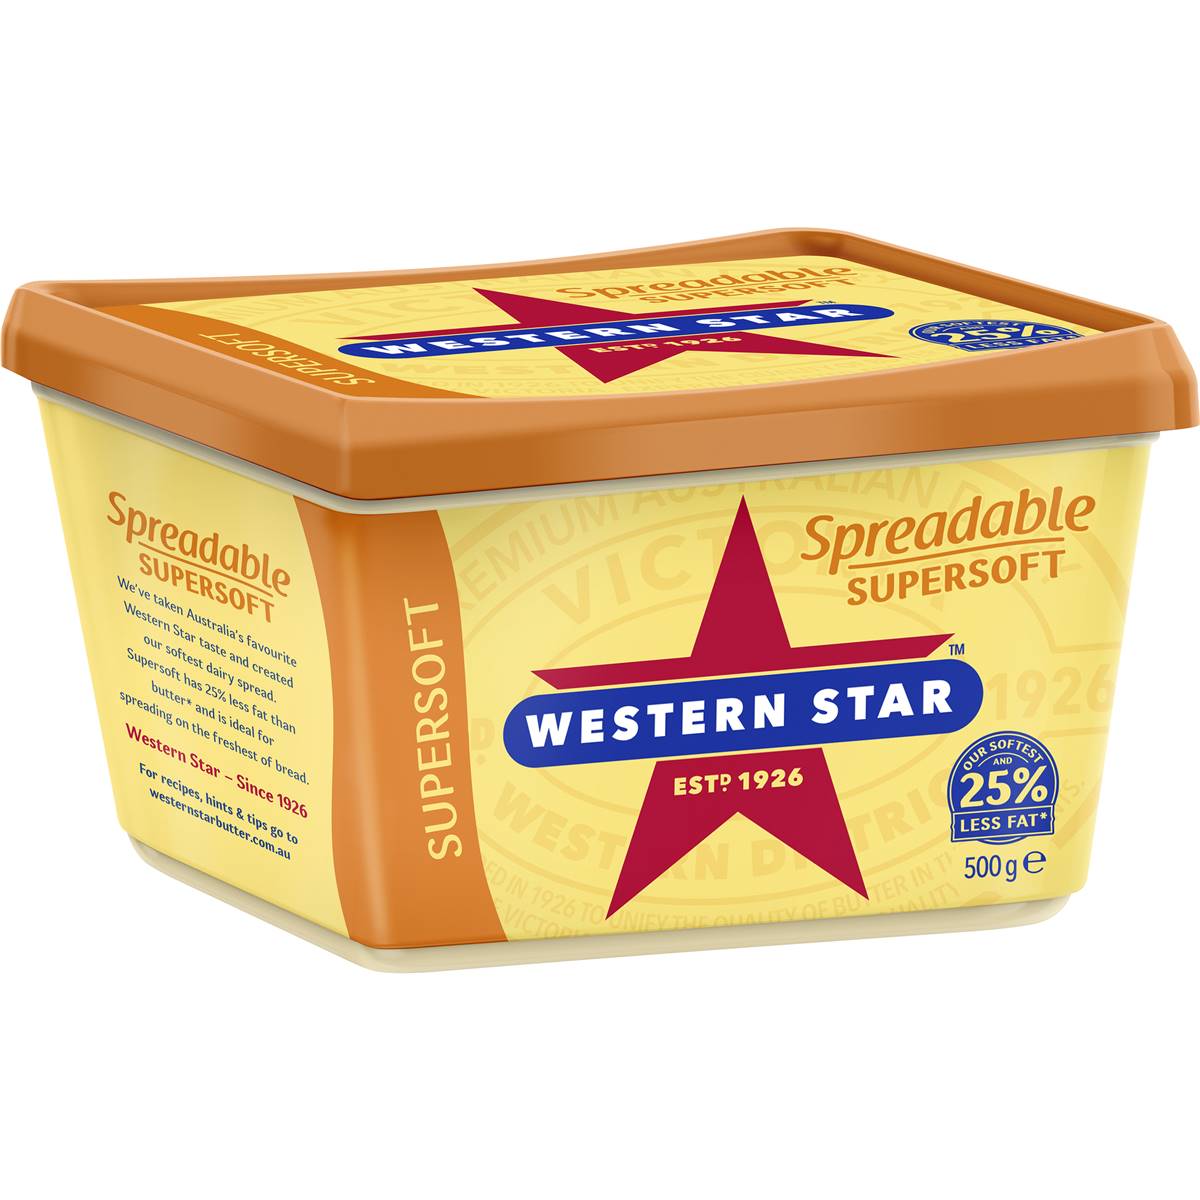 Calories in Western Star Supersoft Spreadable